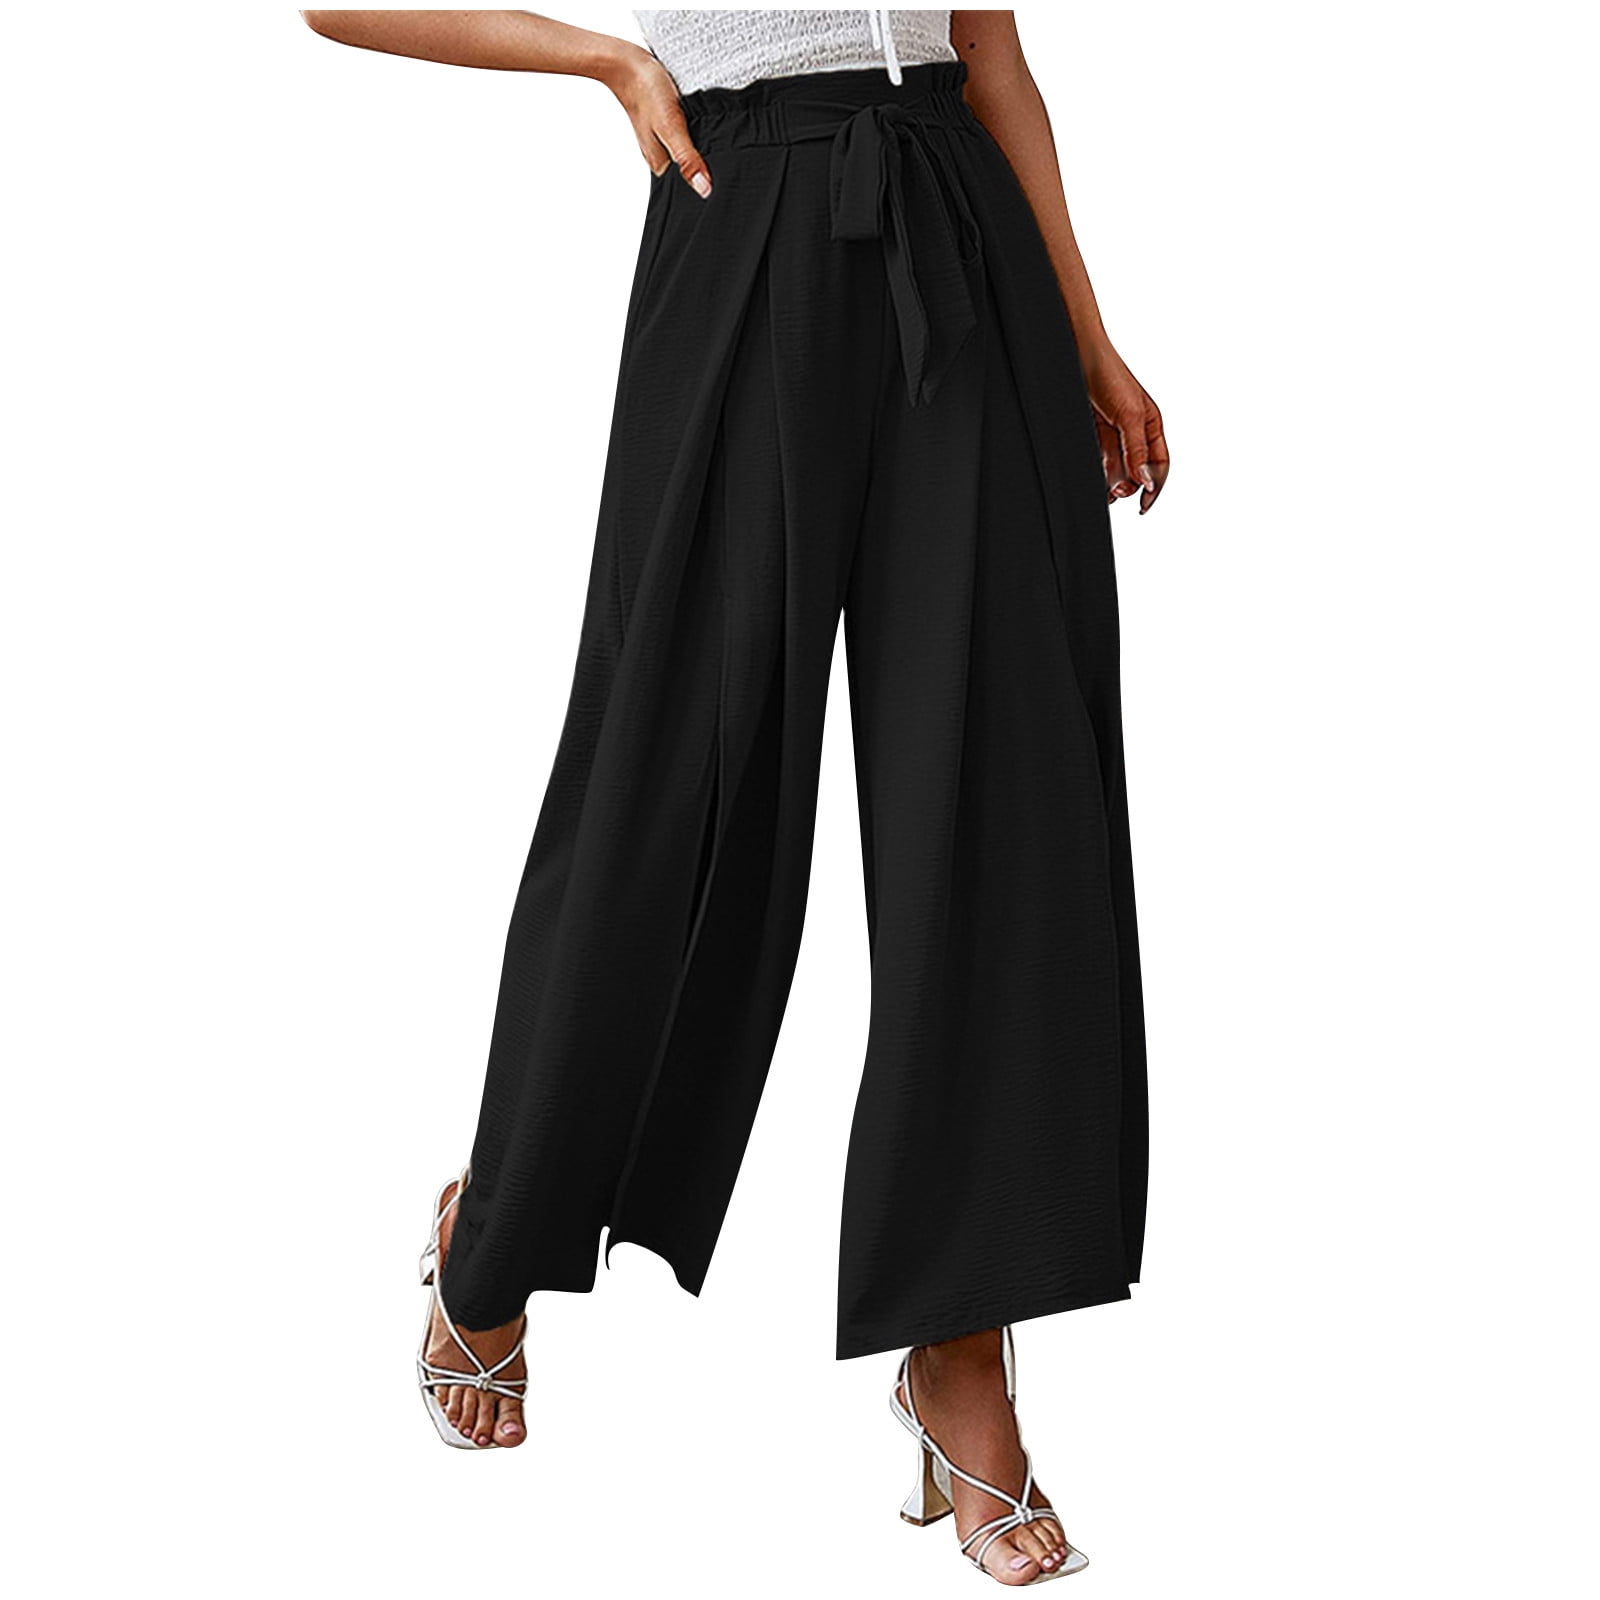 RYRJJ Wide Leg Dress Pants for Women High Waist Pocket Business Work Long  Palazzo Pant Pleated Loose Casual Floor Length Trousers(Black,M)